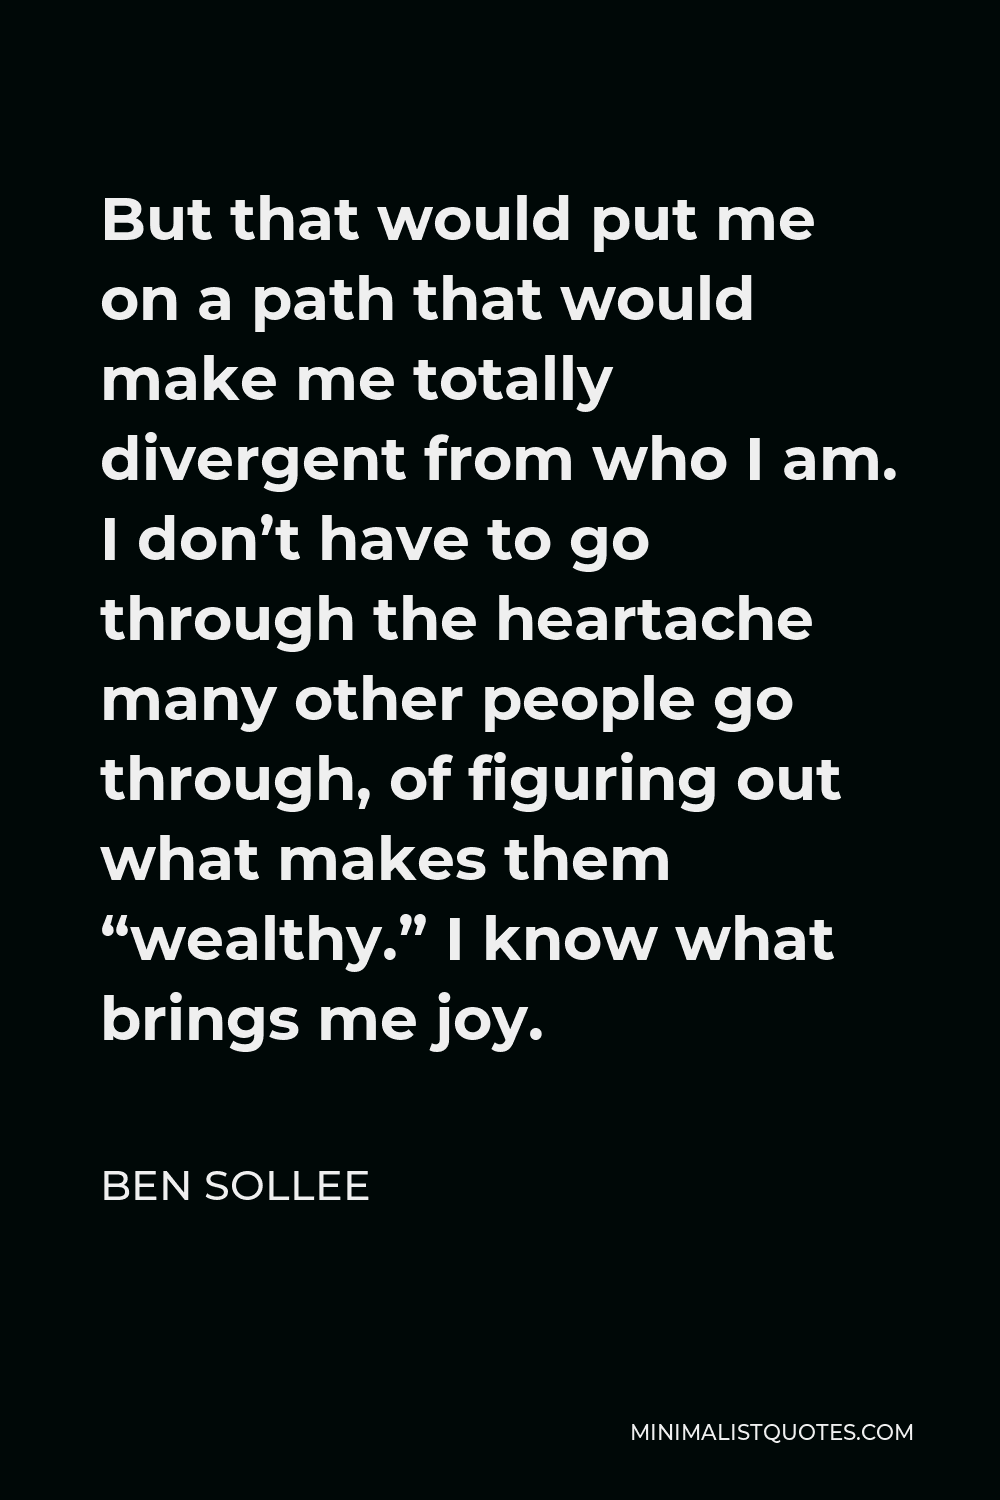 Ben Sollee Quote - But that would put me on a path that would make me totally divergent from who I am. I don’t have to go through the heartache many other people go through, of figuring out what makes them “wealthy.” I know what brings me joy.